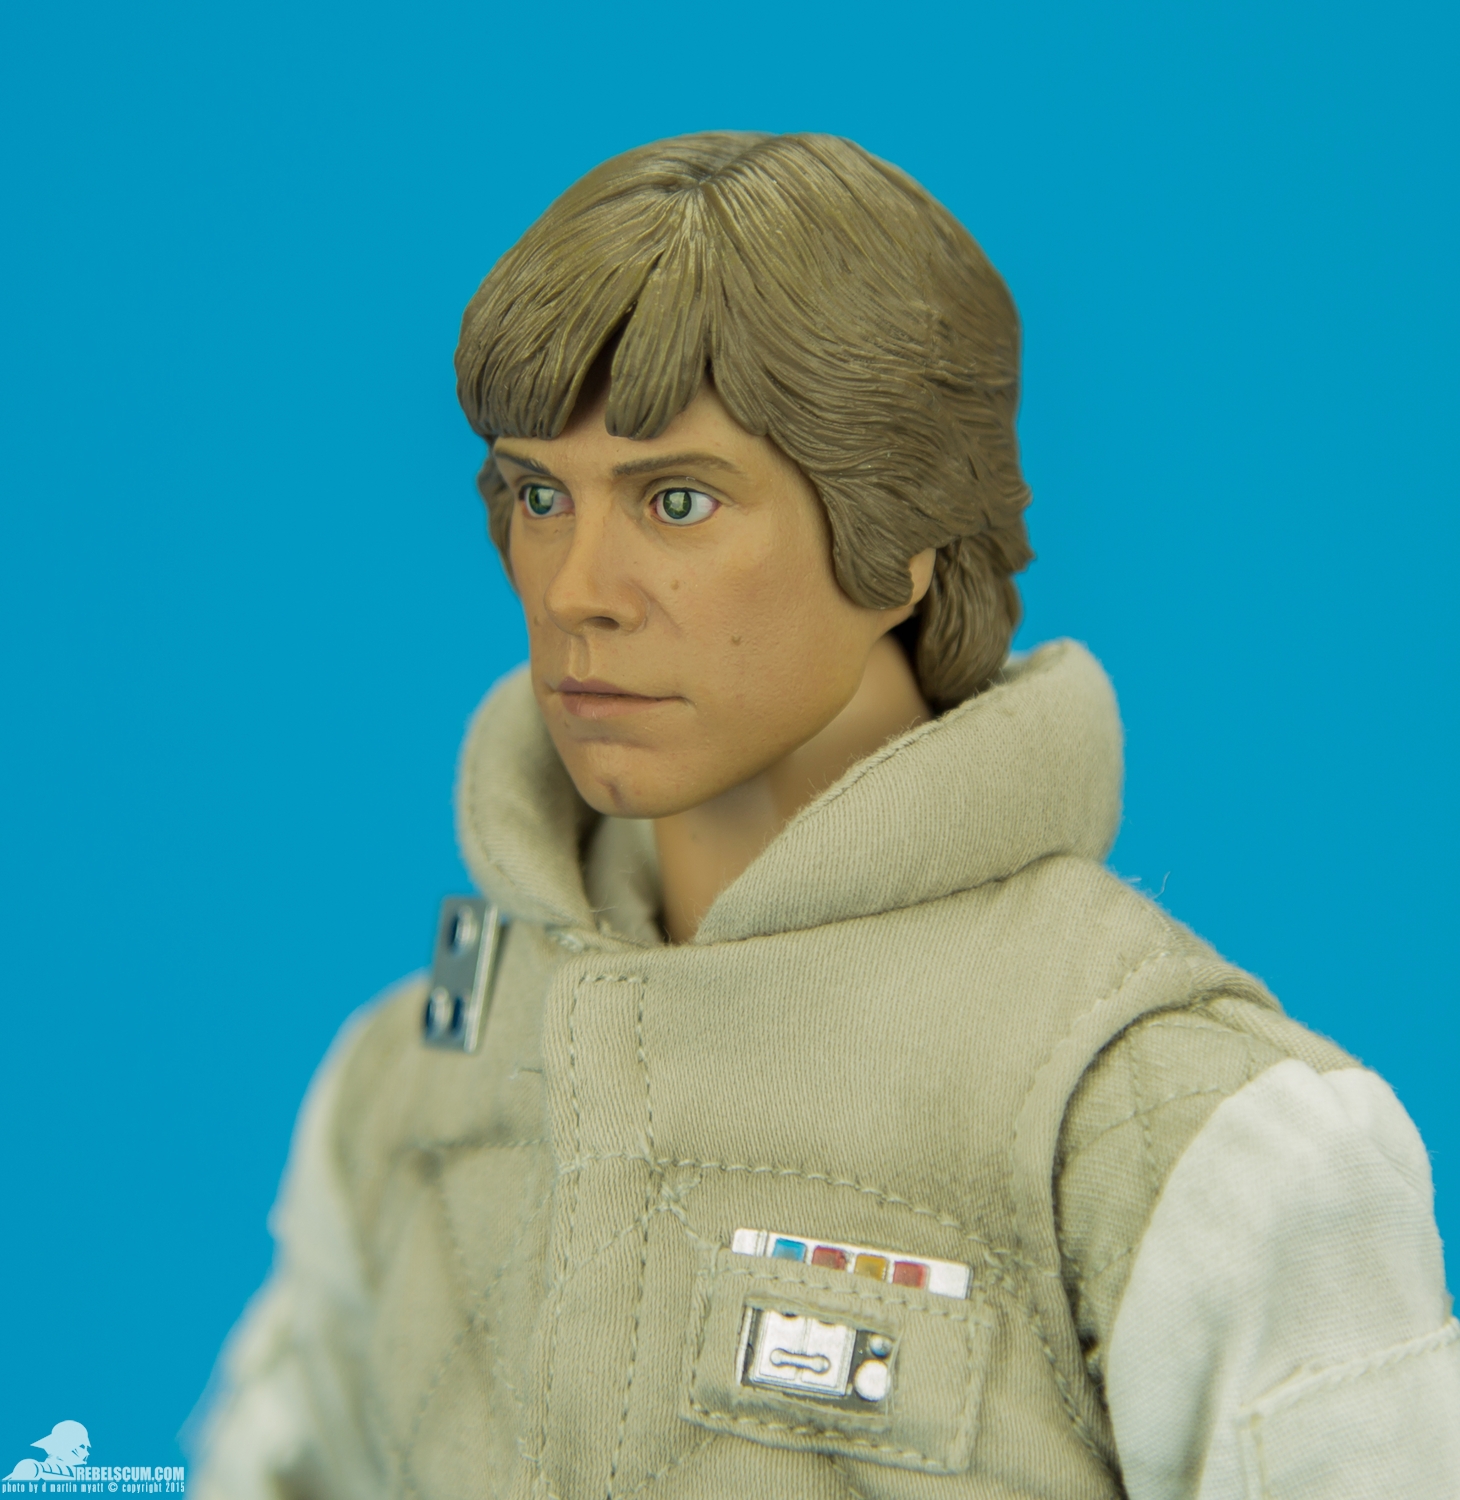 Luke-Skywalker-Hoth-Sixth-Scale-Sideshow-Collectibles-Star-Wars-015.jpg